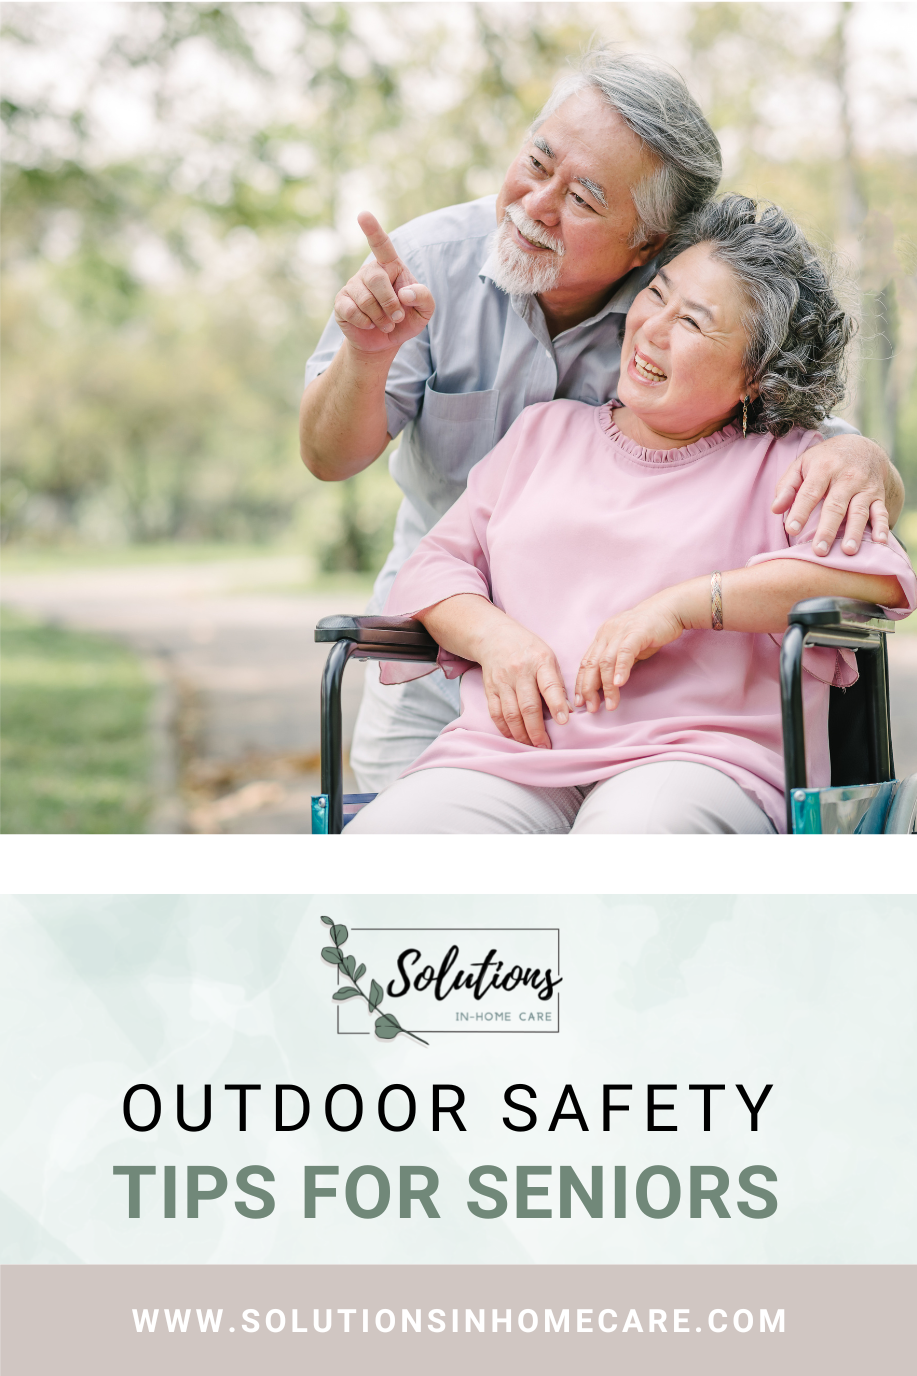 blog post graphic for "Outdoor Safety Tips for Seniors" from Solutions In-Home Care